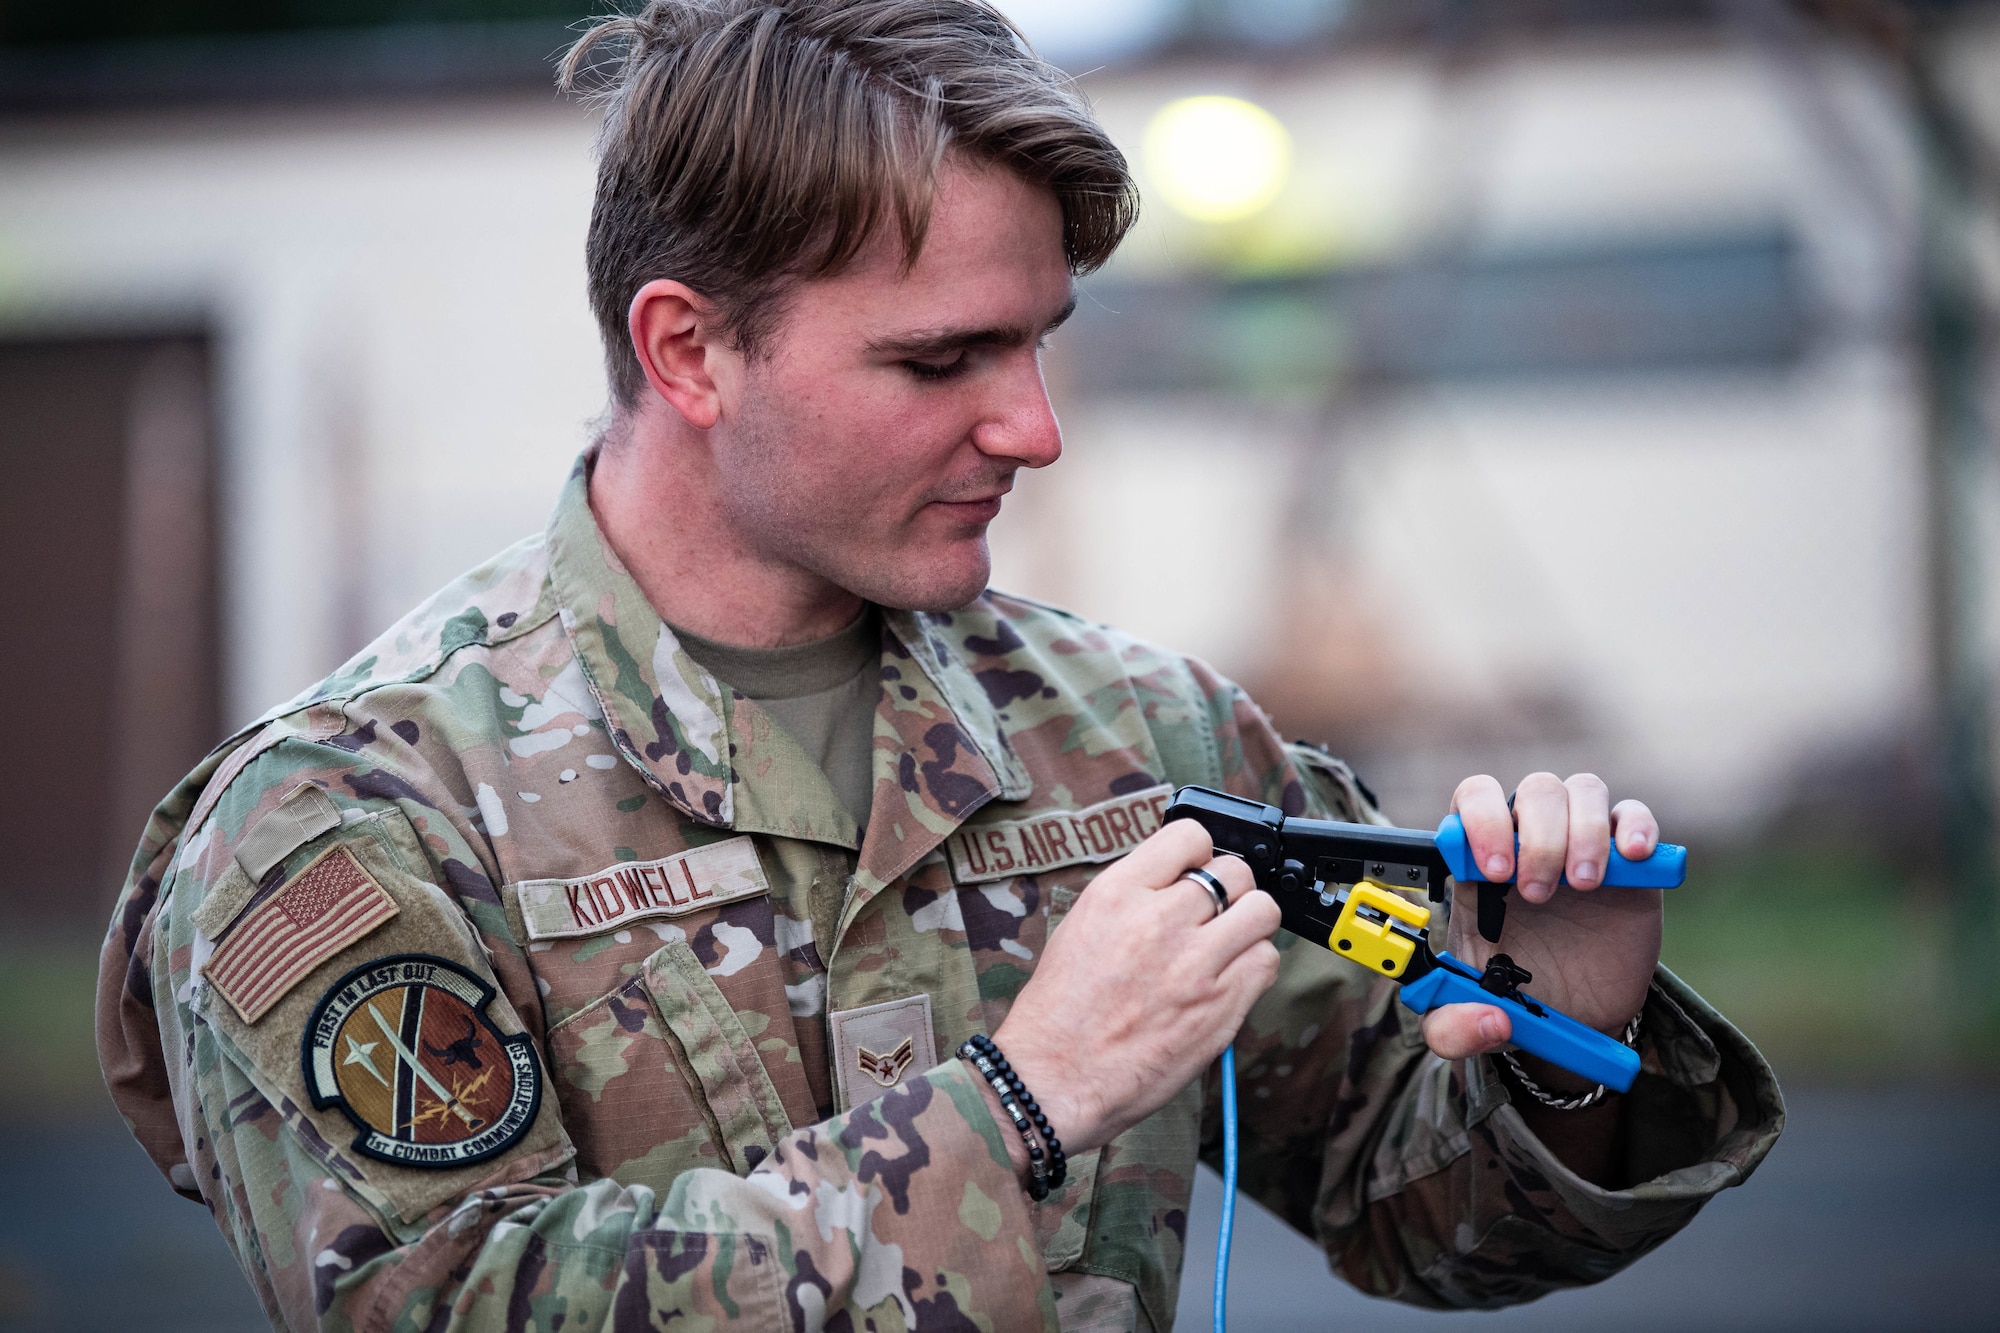 U.S. Air Force Airman 1st Class Seth Kidwell, 1st Combat Communications Squadron tactical communications technician, crimps an ethernet cable during Operation EASY MAC at Ramstein Air Base, Germany, Sept. 19, 2023. Operation EASY MAC is a three-day, cross-organization exercise that allows the 693rd Intelligence Support Squadron to demonstrate their intelligence capabilities in an austere environment. (U.S. Air Force photo by Senior Airman Jared Lovett)